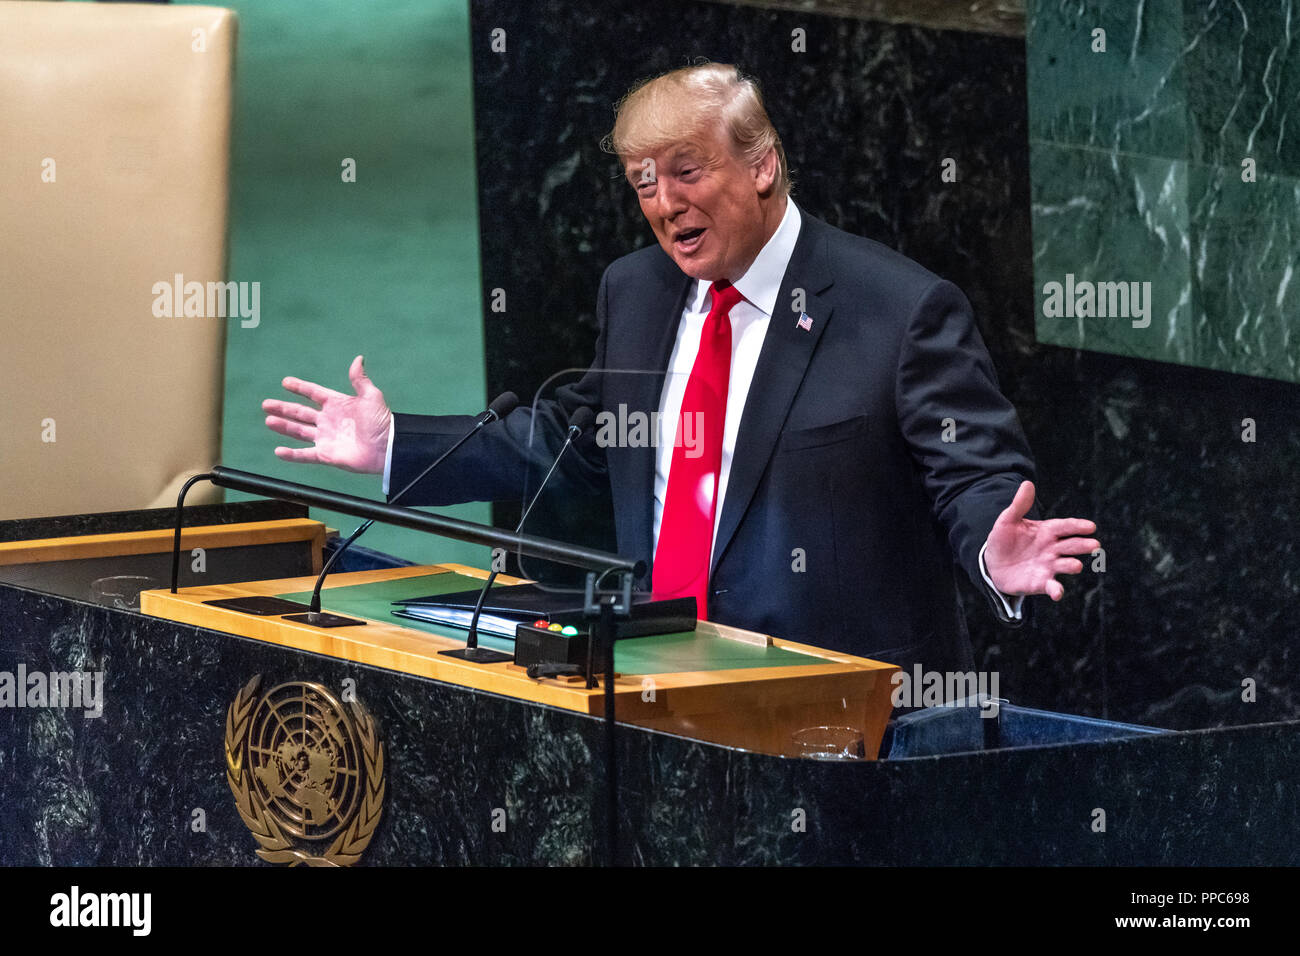 New York, USA, 25 September 2018. US President Donald Trump addresses the United Nations General Assembly in New York city. Photo by Enrique Shore Credit: Enrique Shore/Alamy Live News Credit: Enrique Shore/Alamy Live News Stock Photo